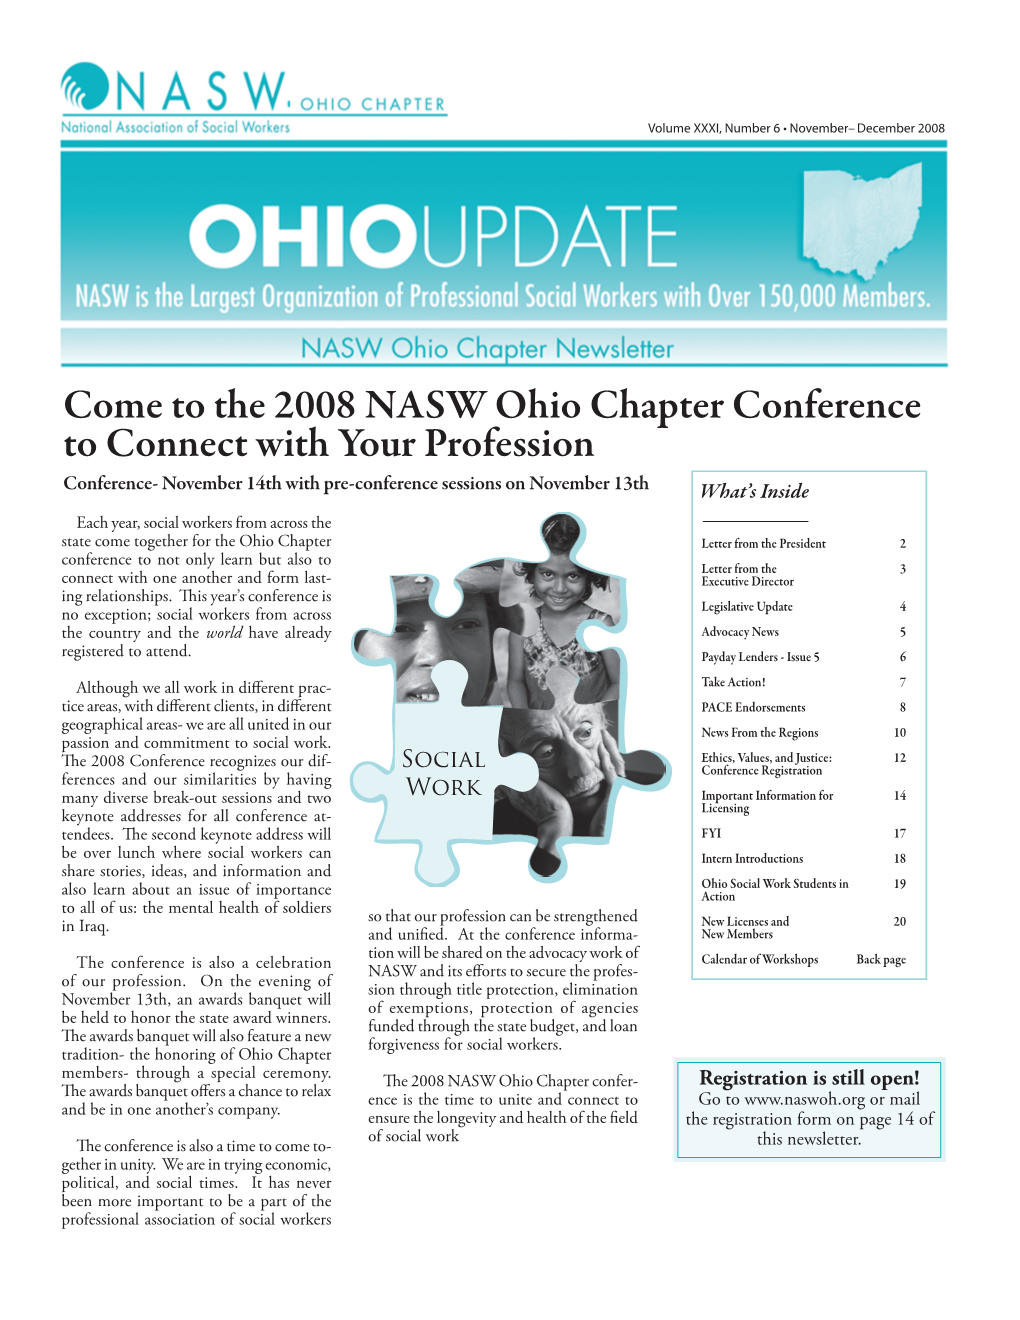 Come to the 2008 NASW Ohio Chapter Conference to Connect With